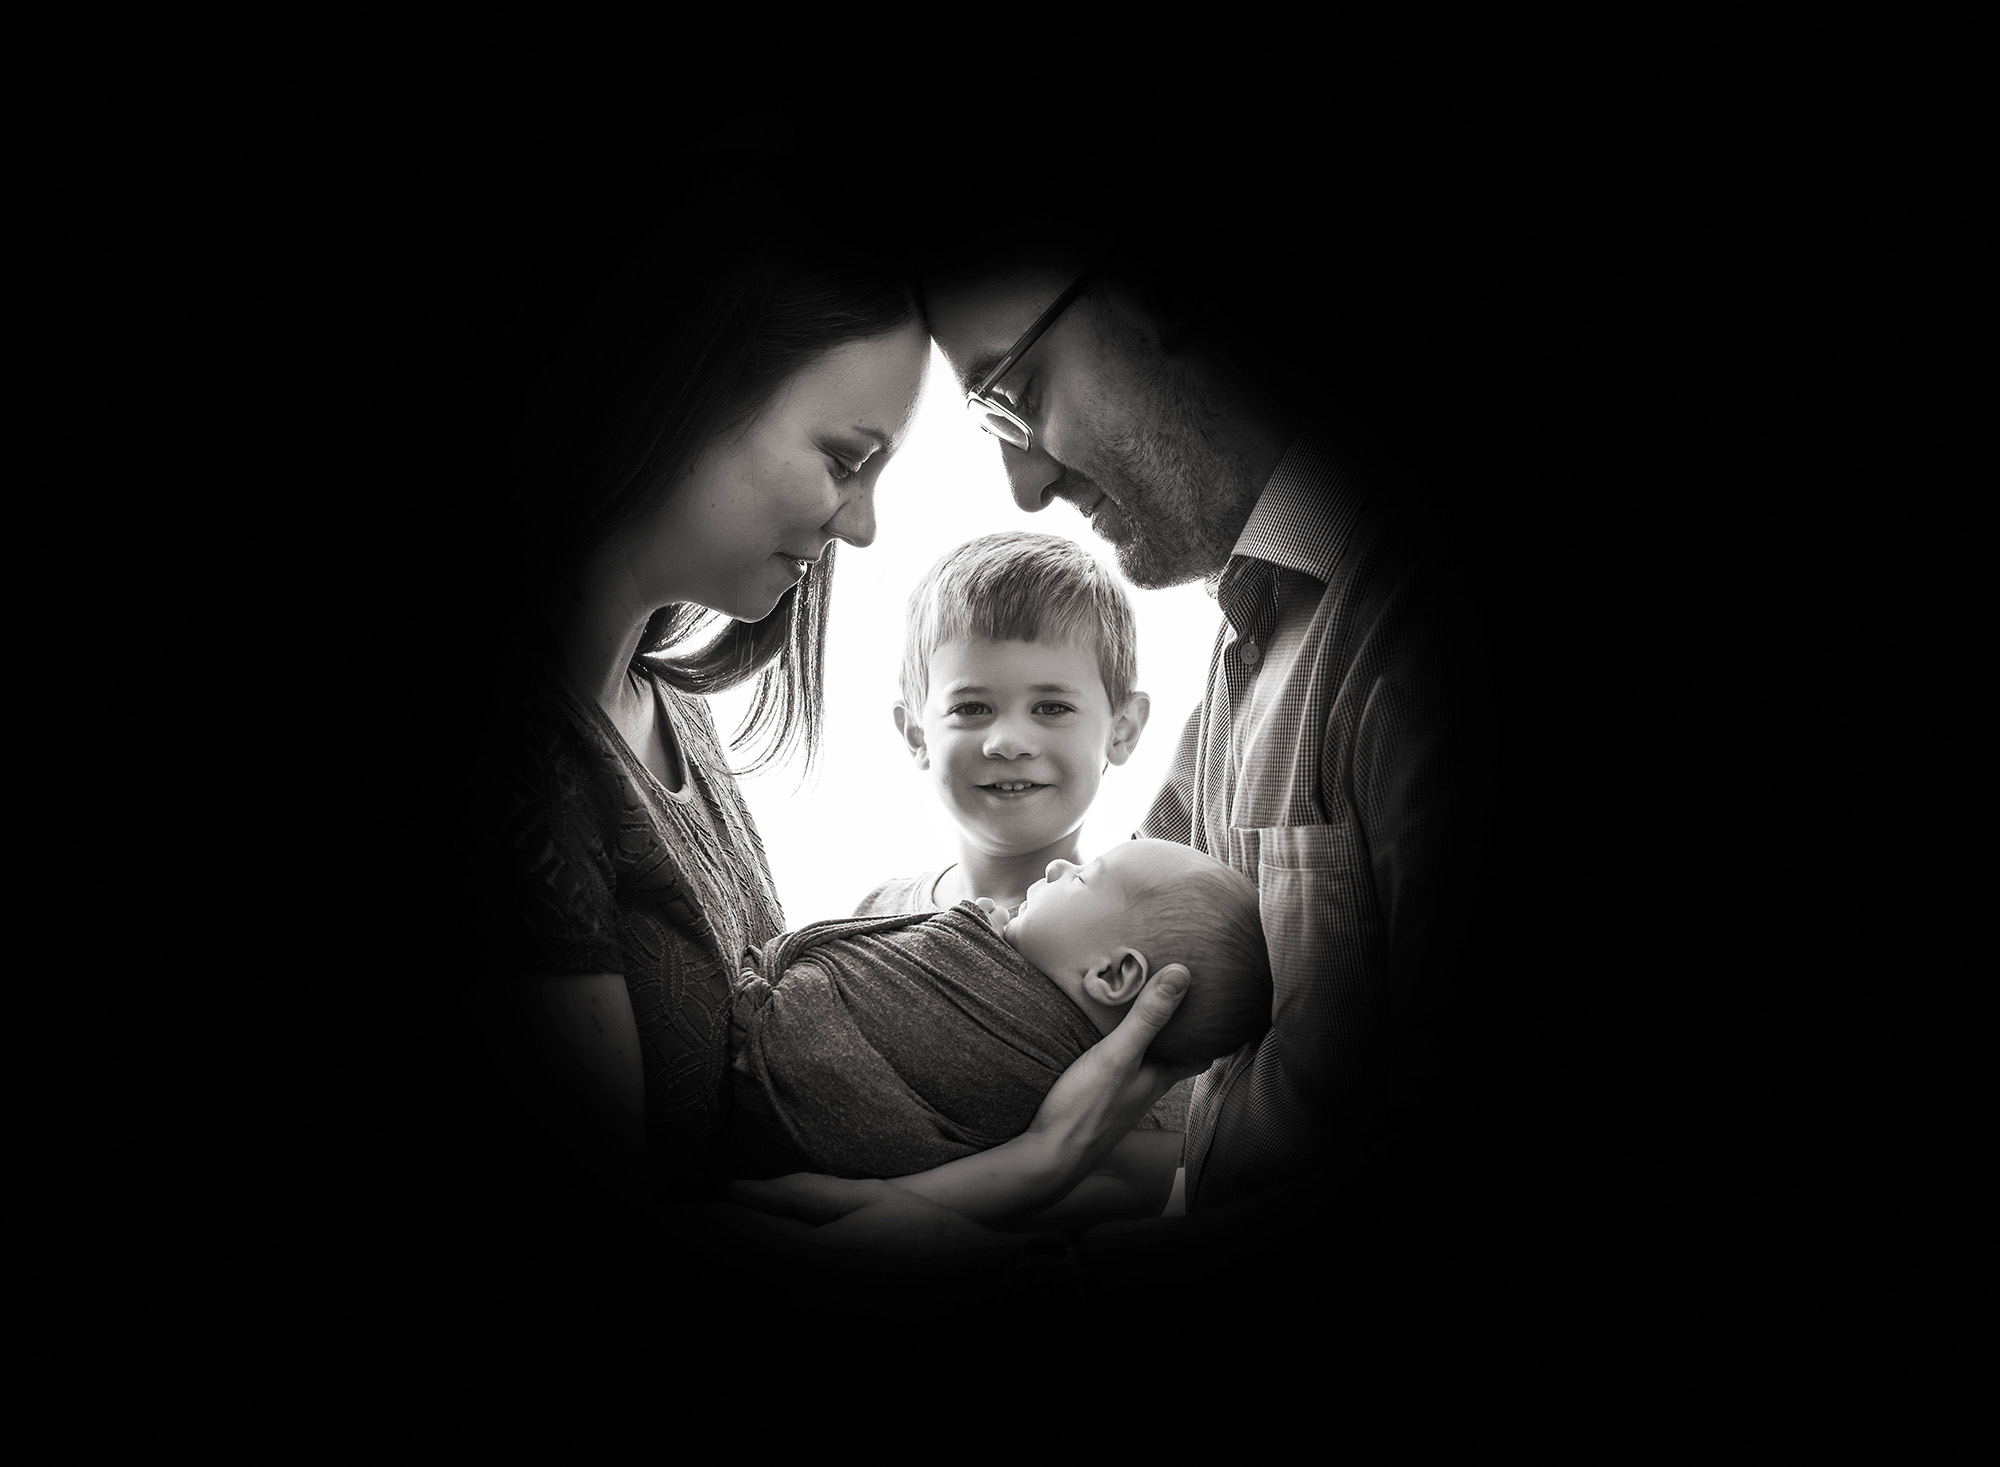 silhouette shadow of parents face's while cradling their newborn baby boy while older son peaks through